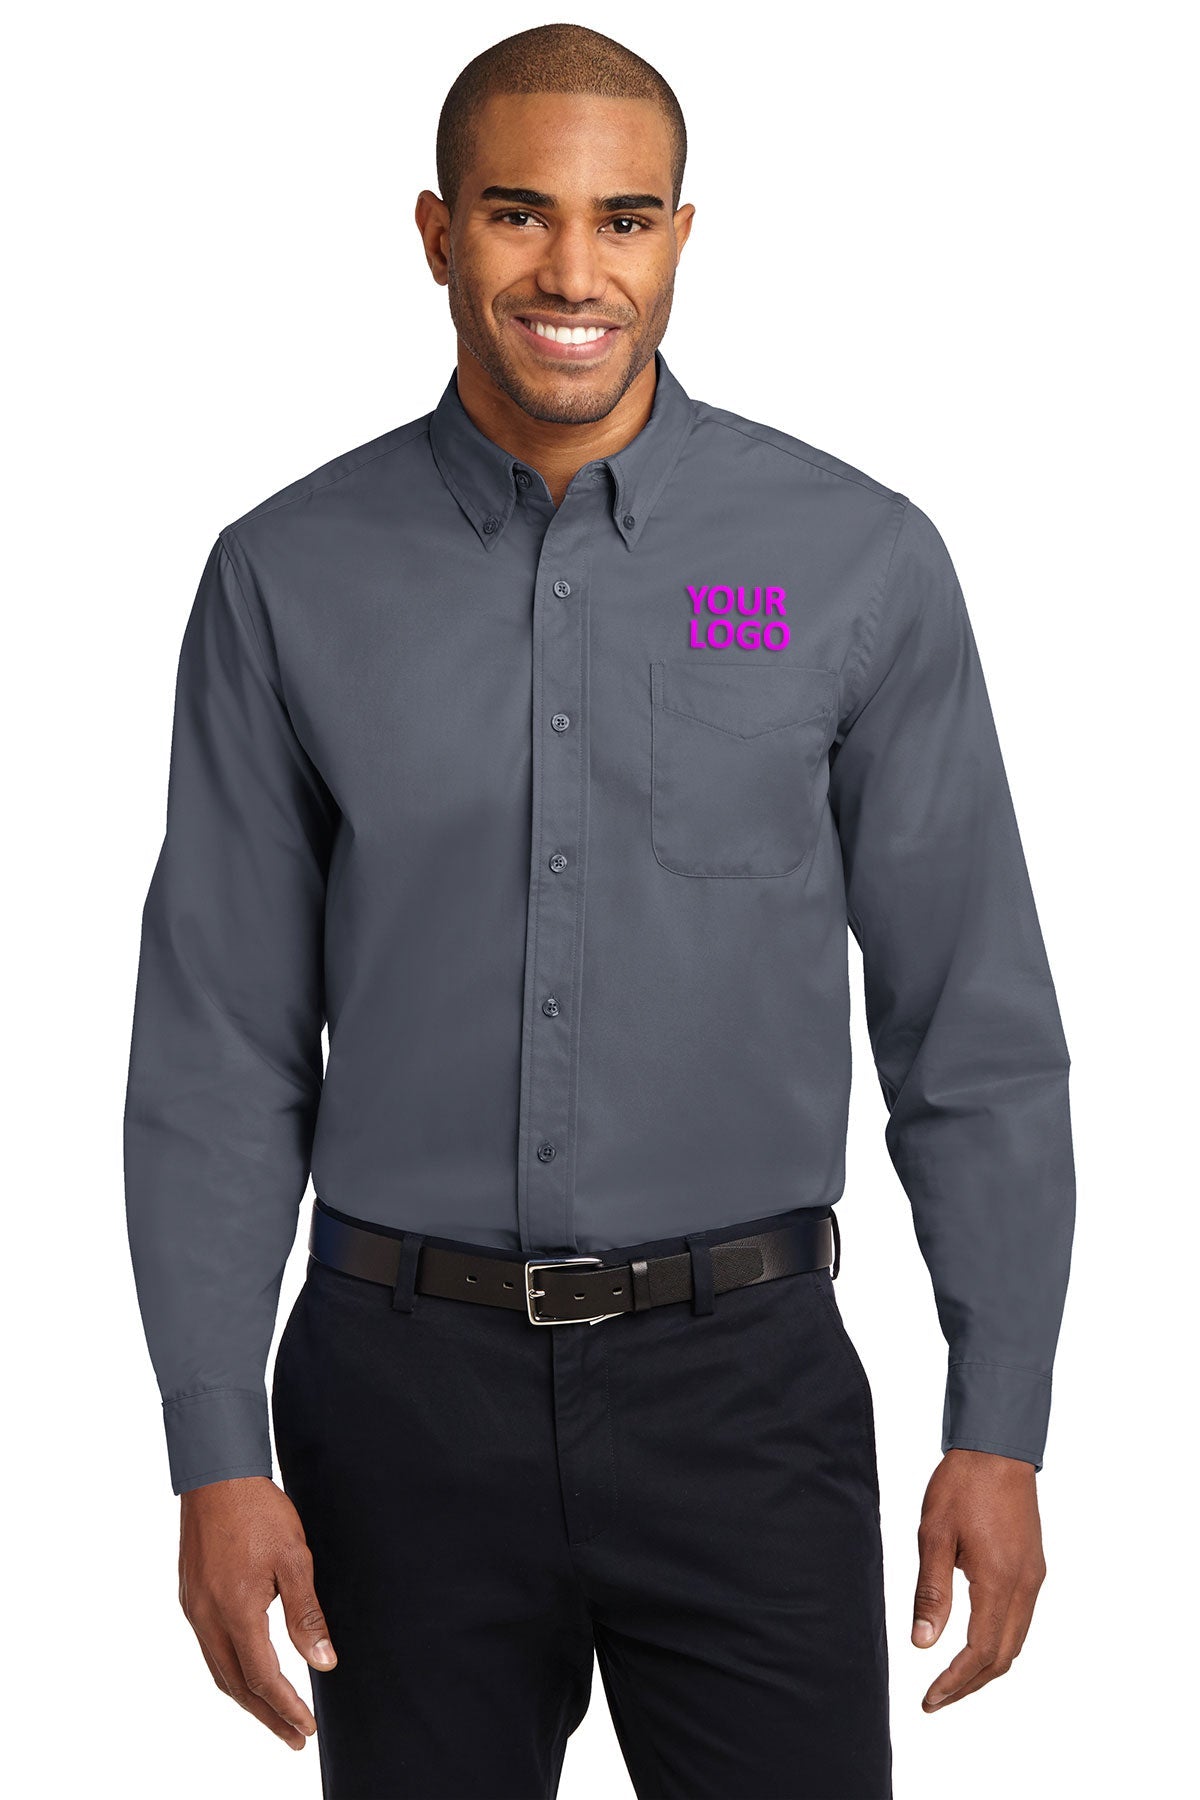 Port Authority Steel Grey/Light Stone S608ES business shirts with company logo